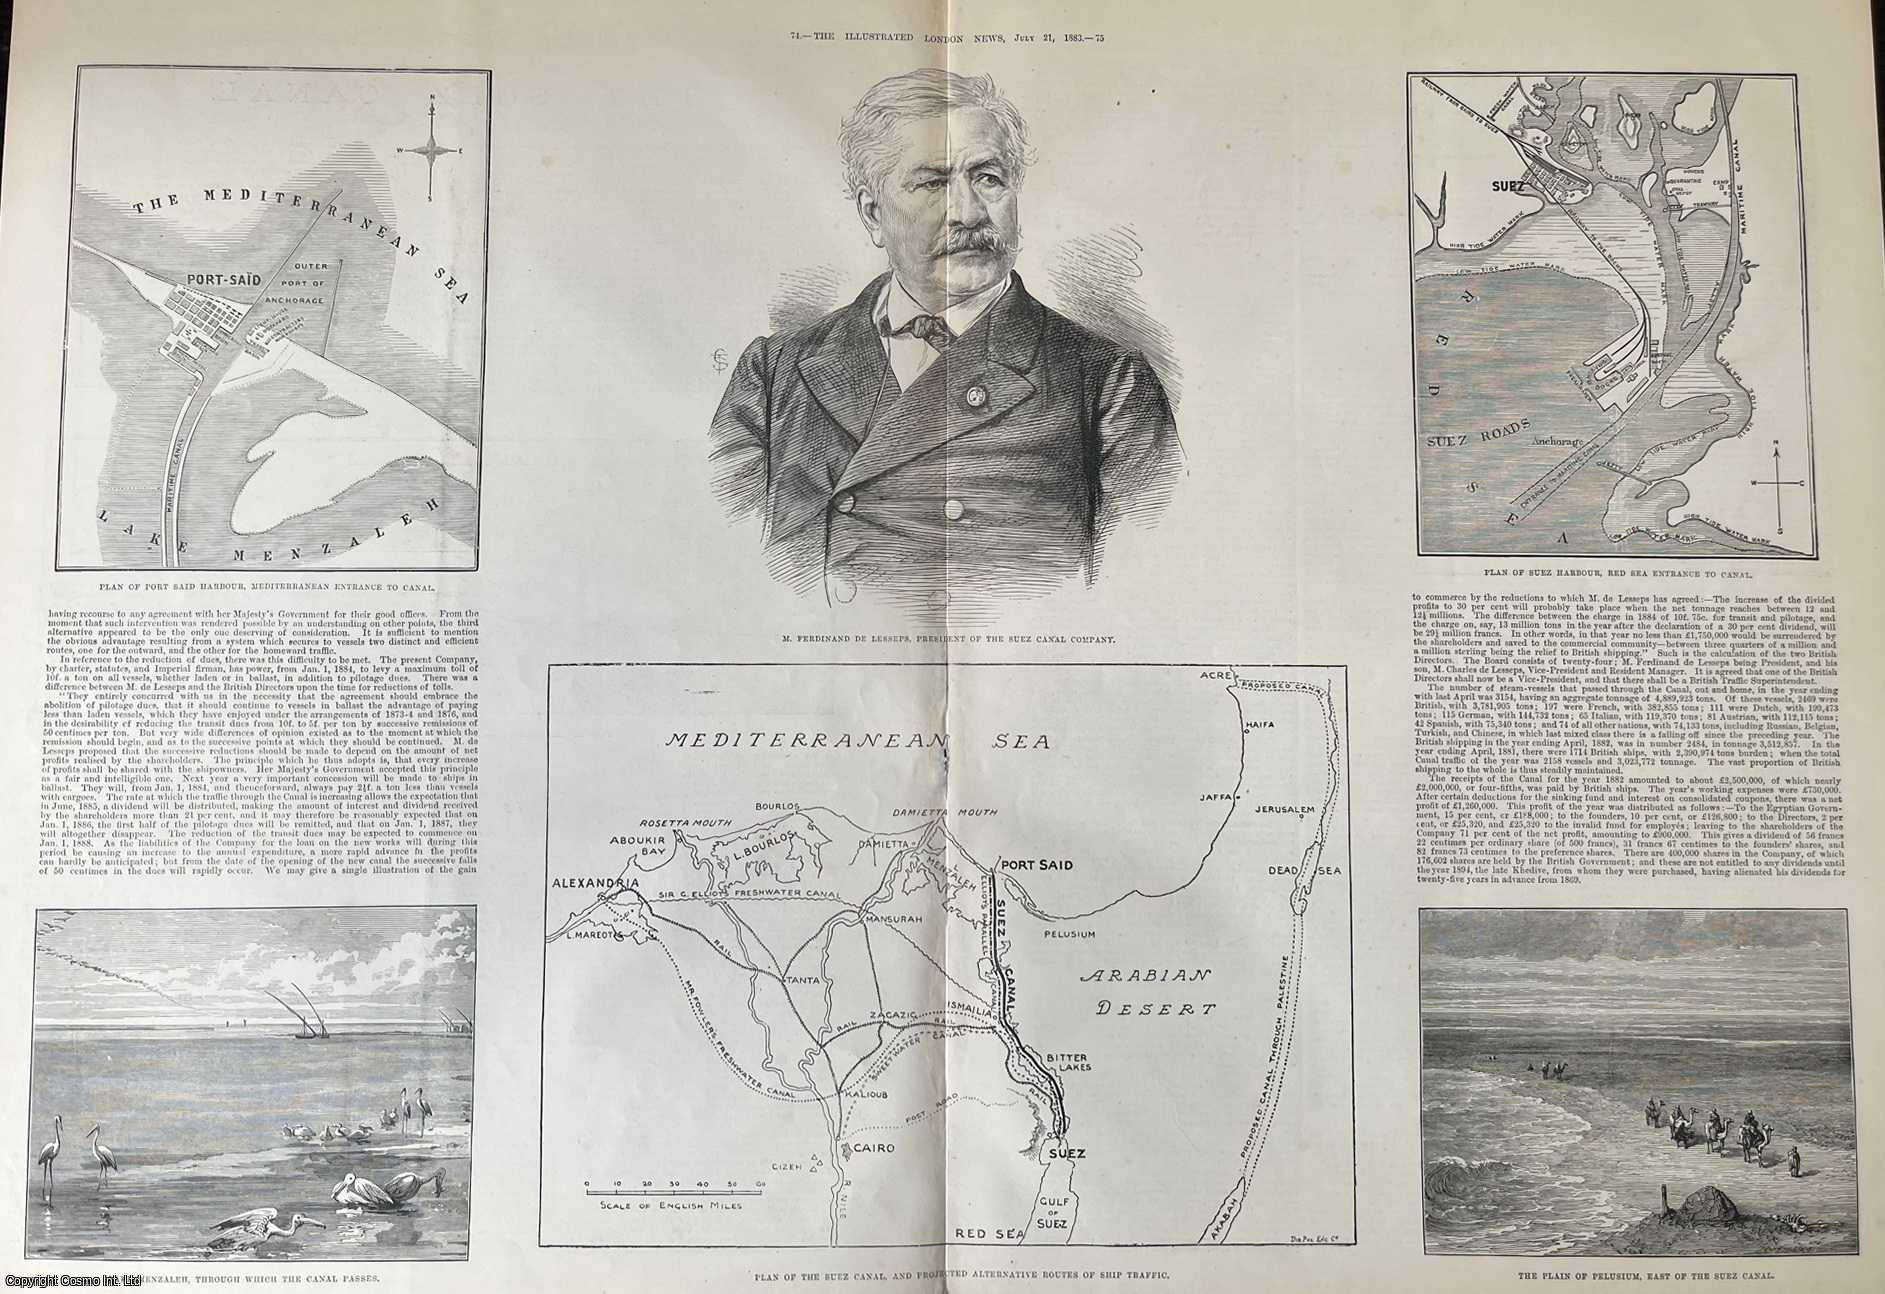 H.M. STANLEY, CONGO RIVER - The Suez Canal Question in Parliament. A collection of plans, maps and original woodcut engravings, with accompanying text, from the Illustrated London News, 1883.